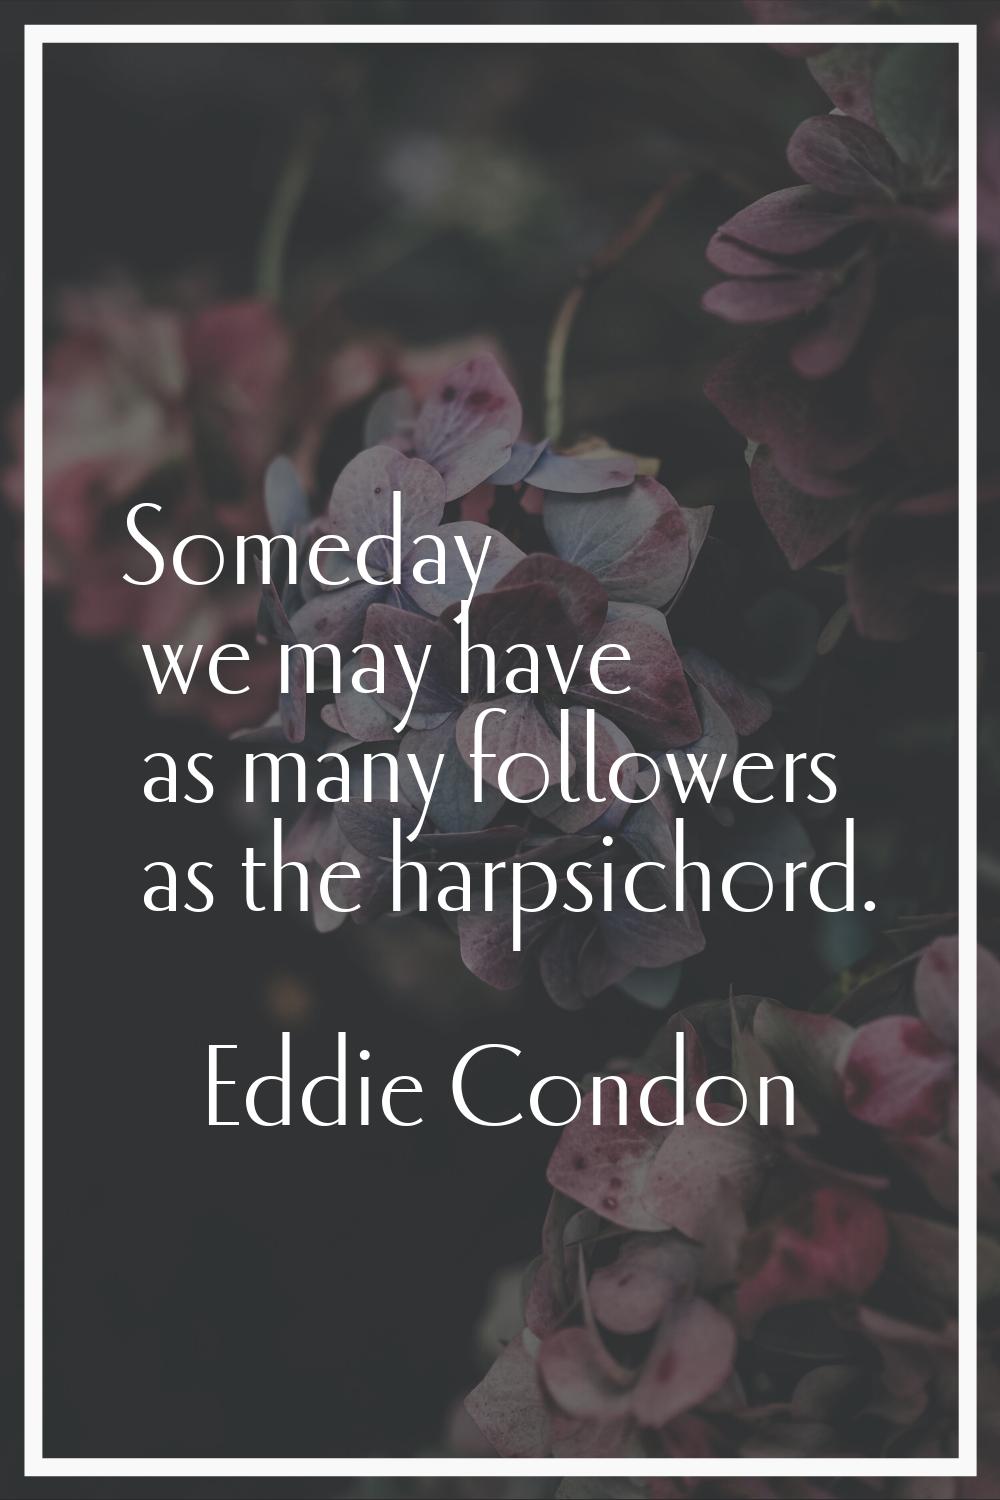 Someday we may have as many followers as the harpsichord.